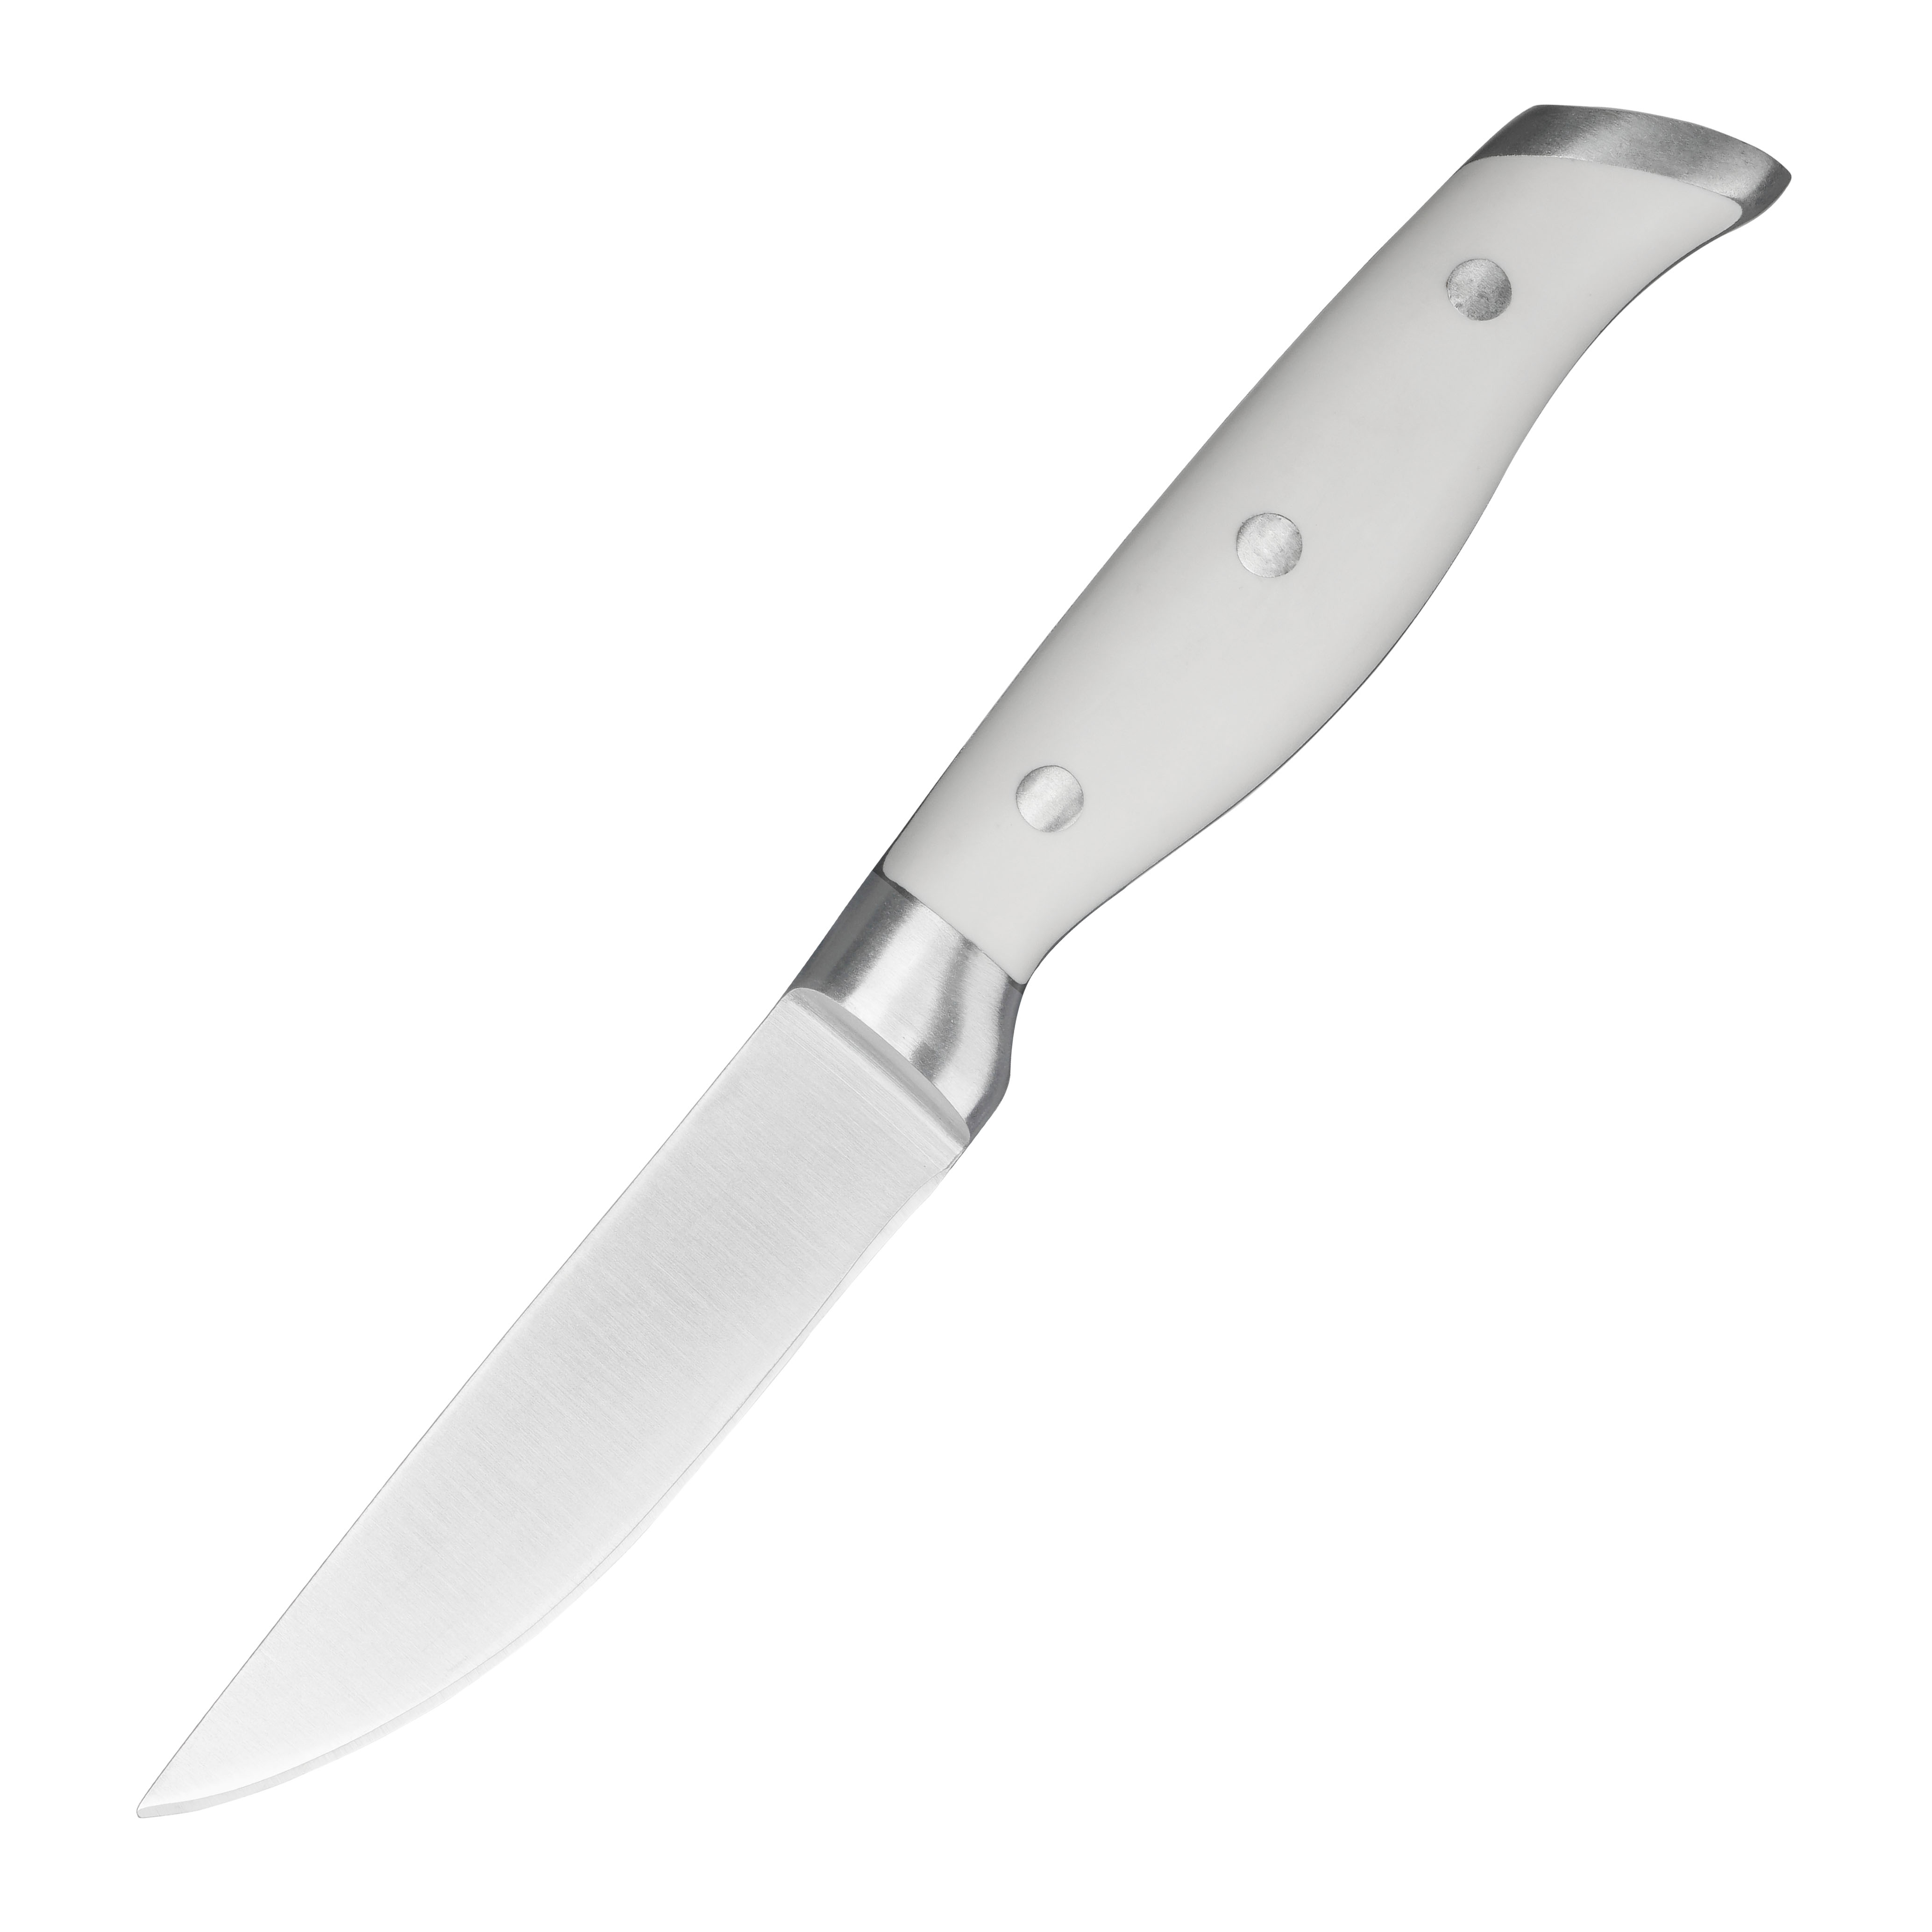 Jourmet 3.5-inch Paring Knife displayed, featuring a sharp stainless steel blade and a chic white handle, ideal for precise kitchen prep.